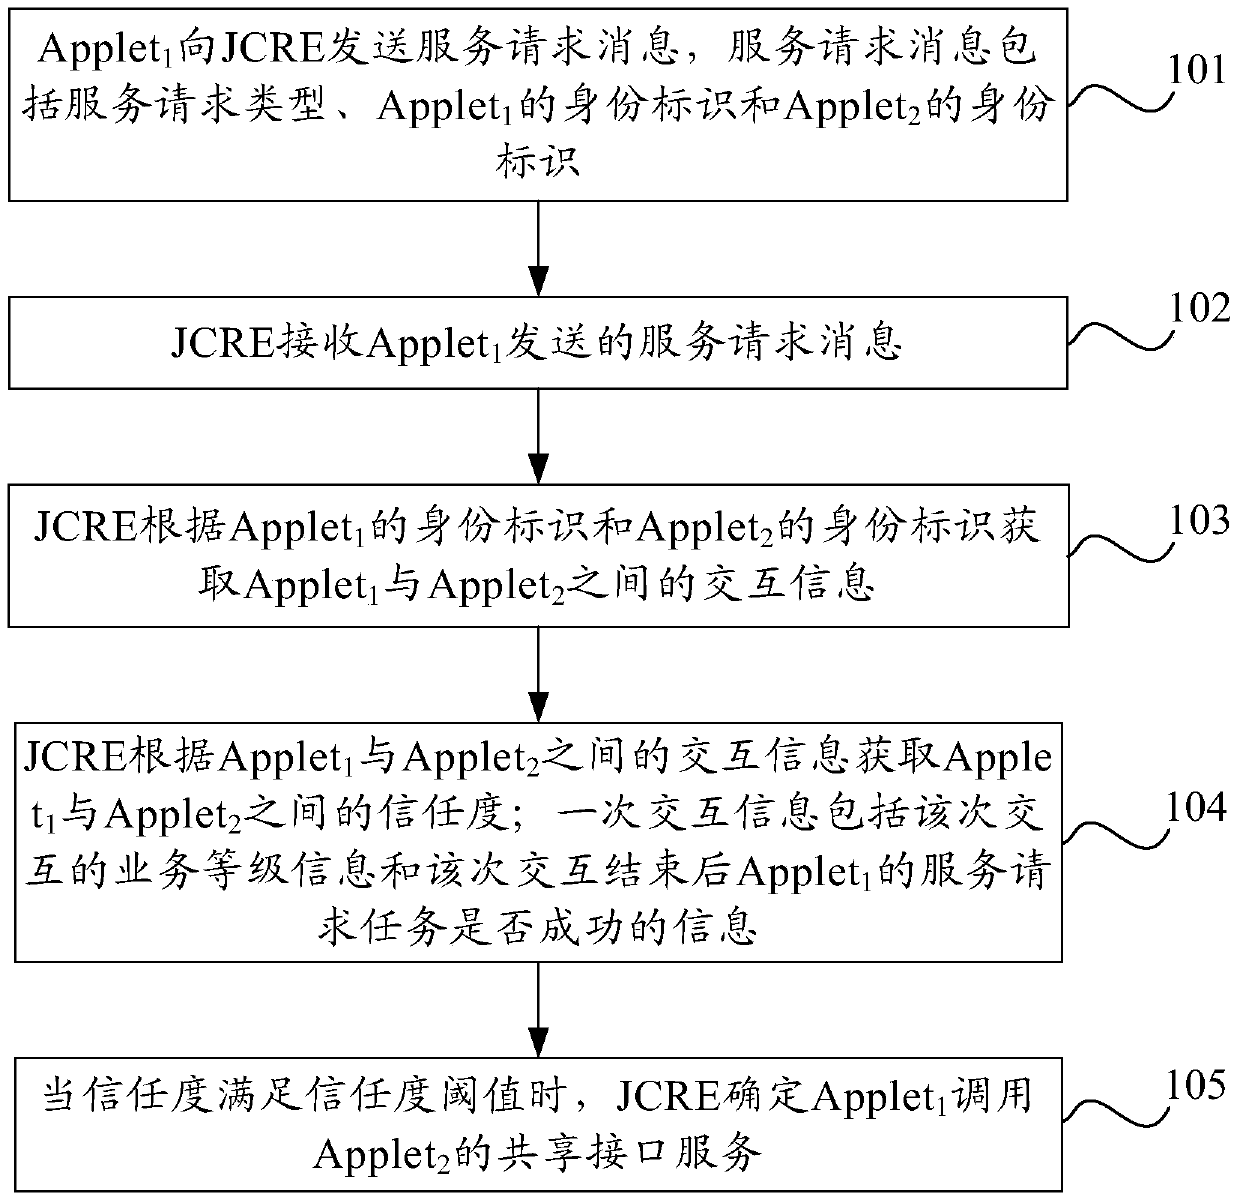 JAVA card object calling method and apparatus